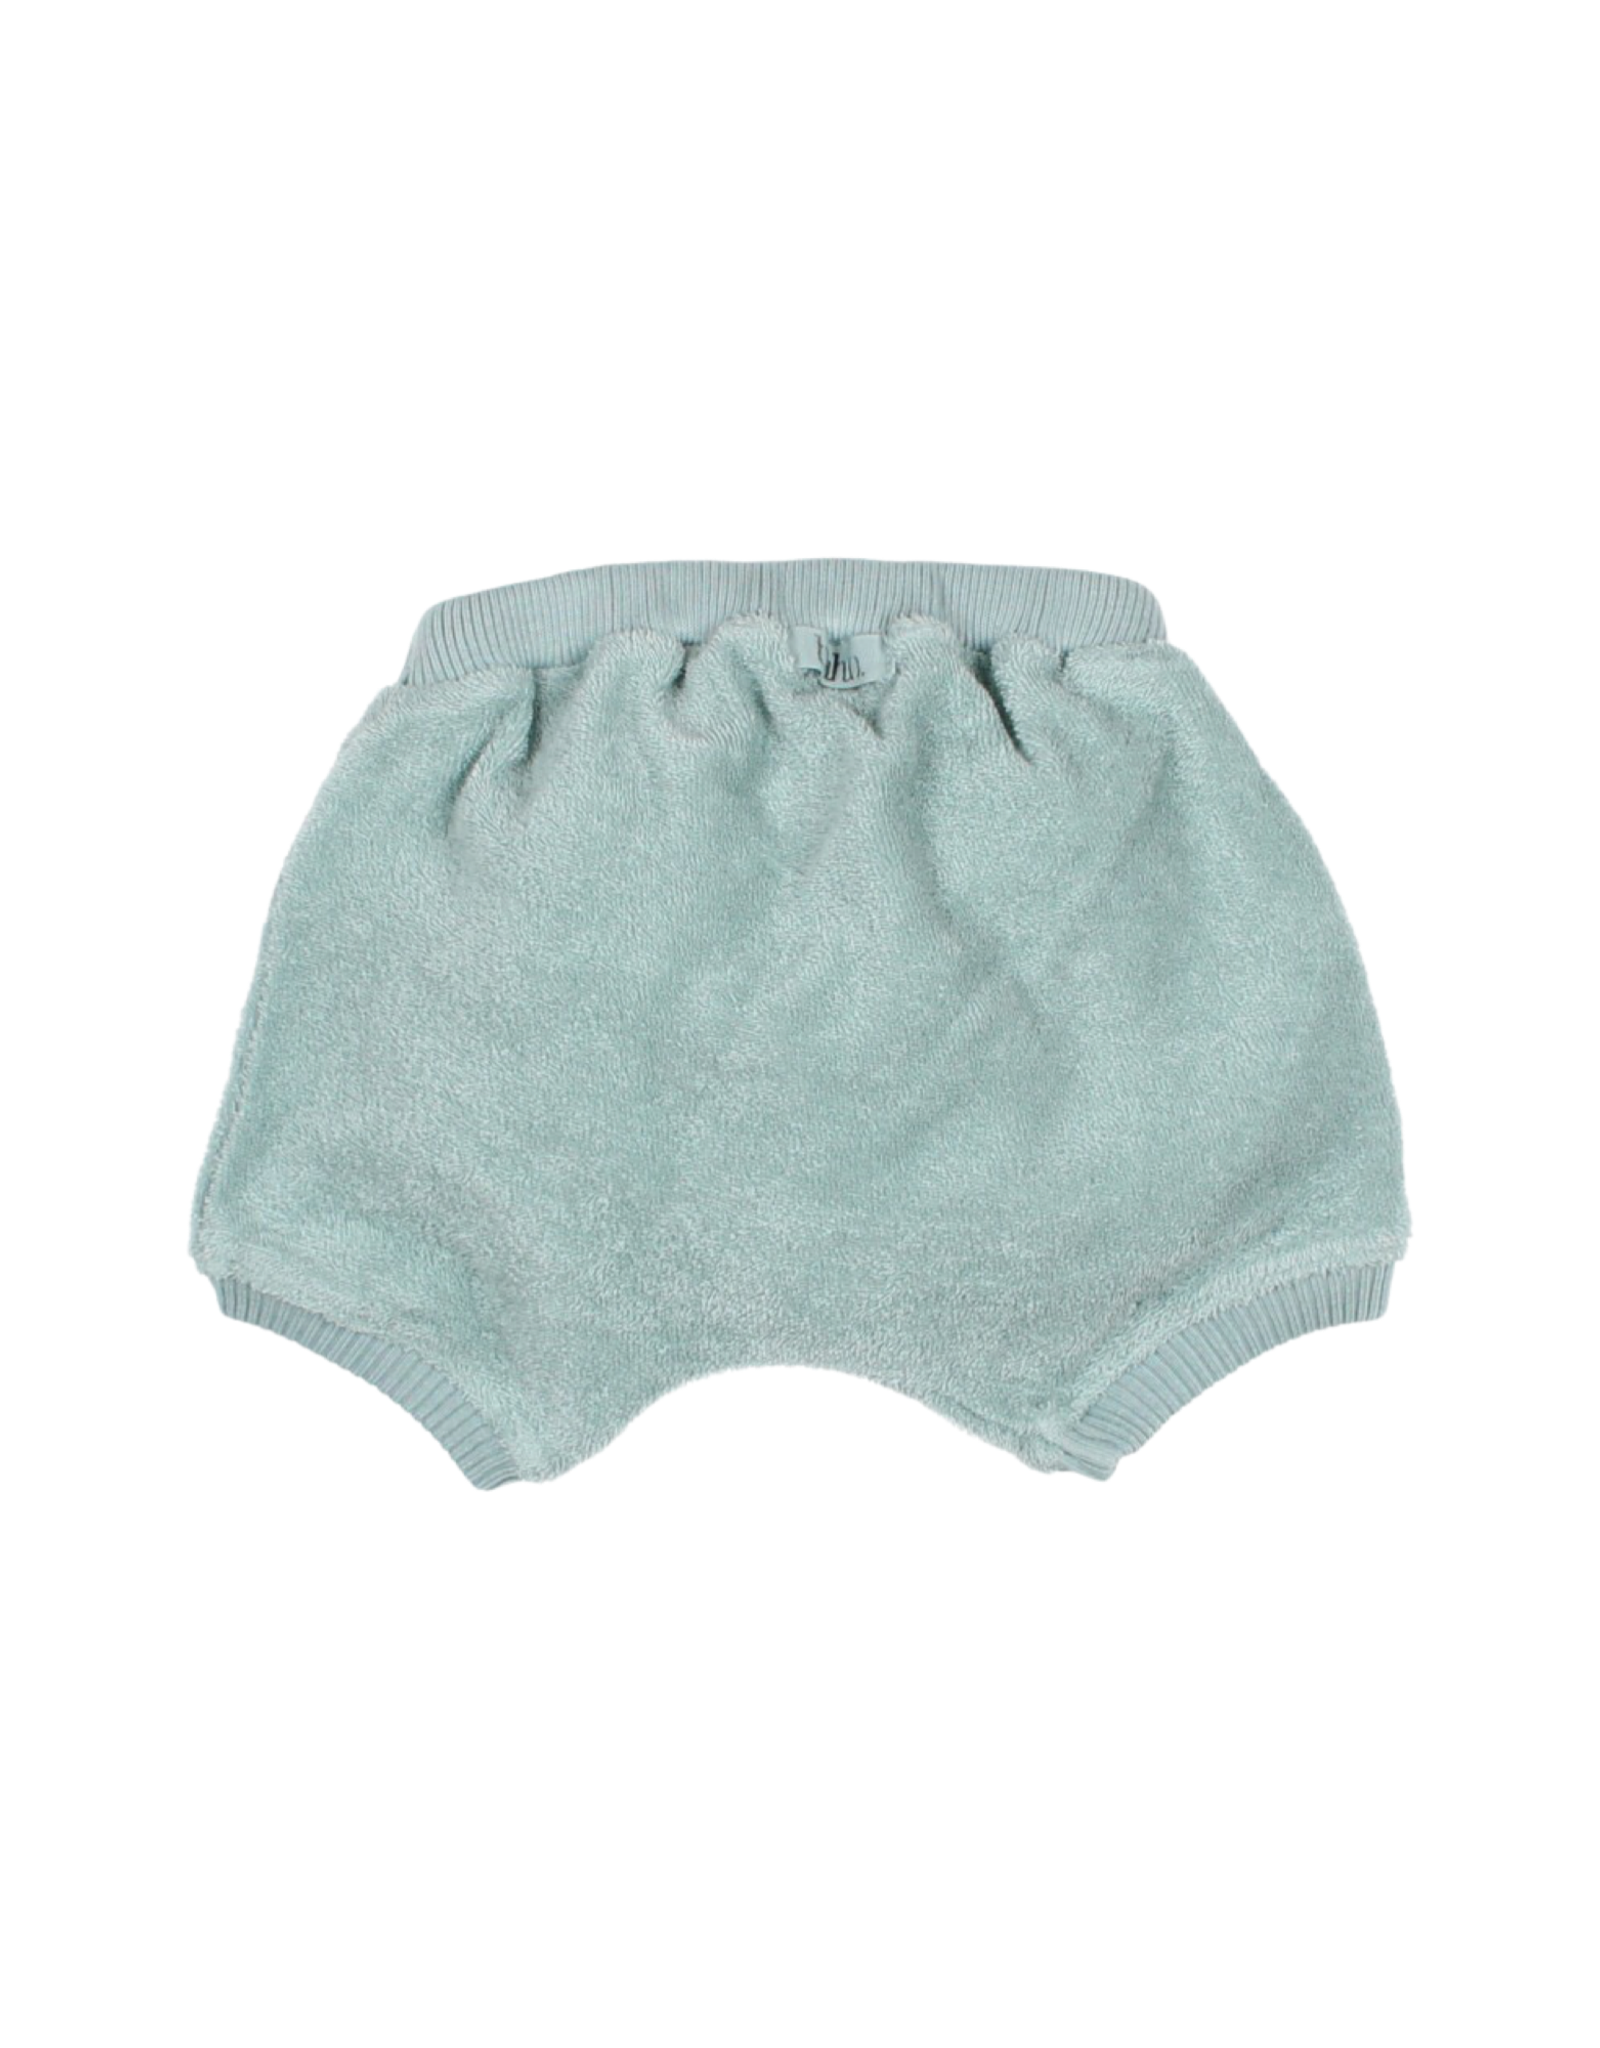 Buho Baby Terry Cloth Bloomer